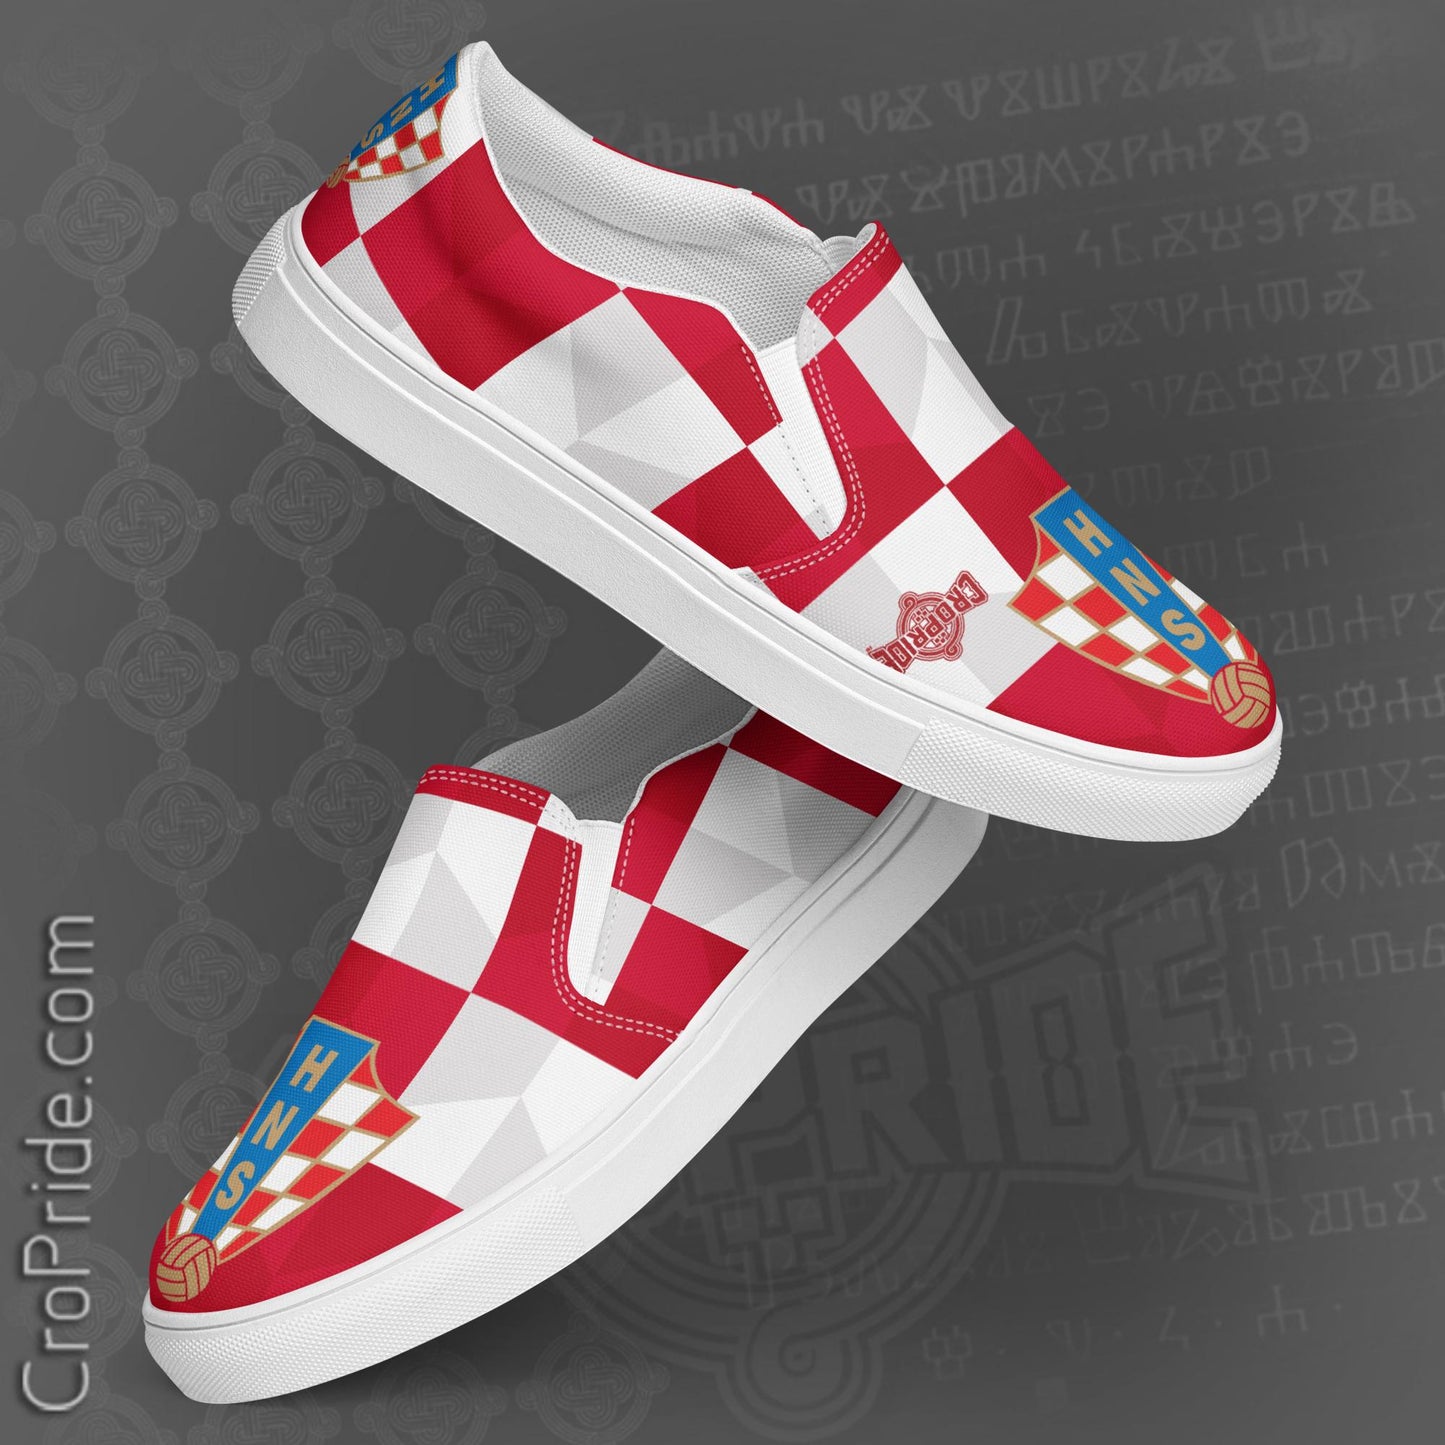 Croatian Checkers Slip-On Canvas Shoes with HNS Logo | Men's Fashion Footwear